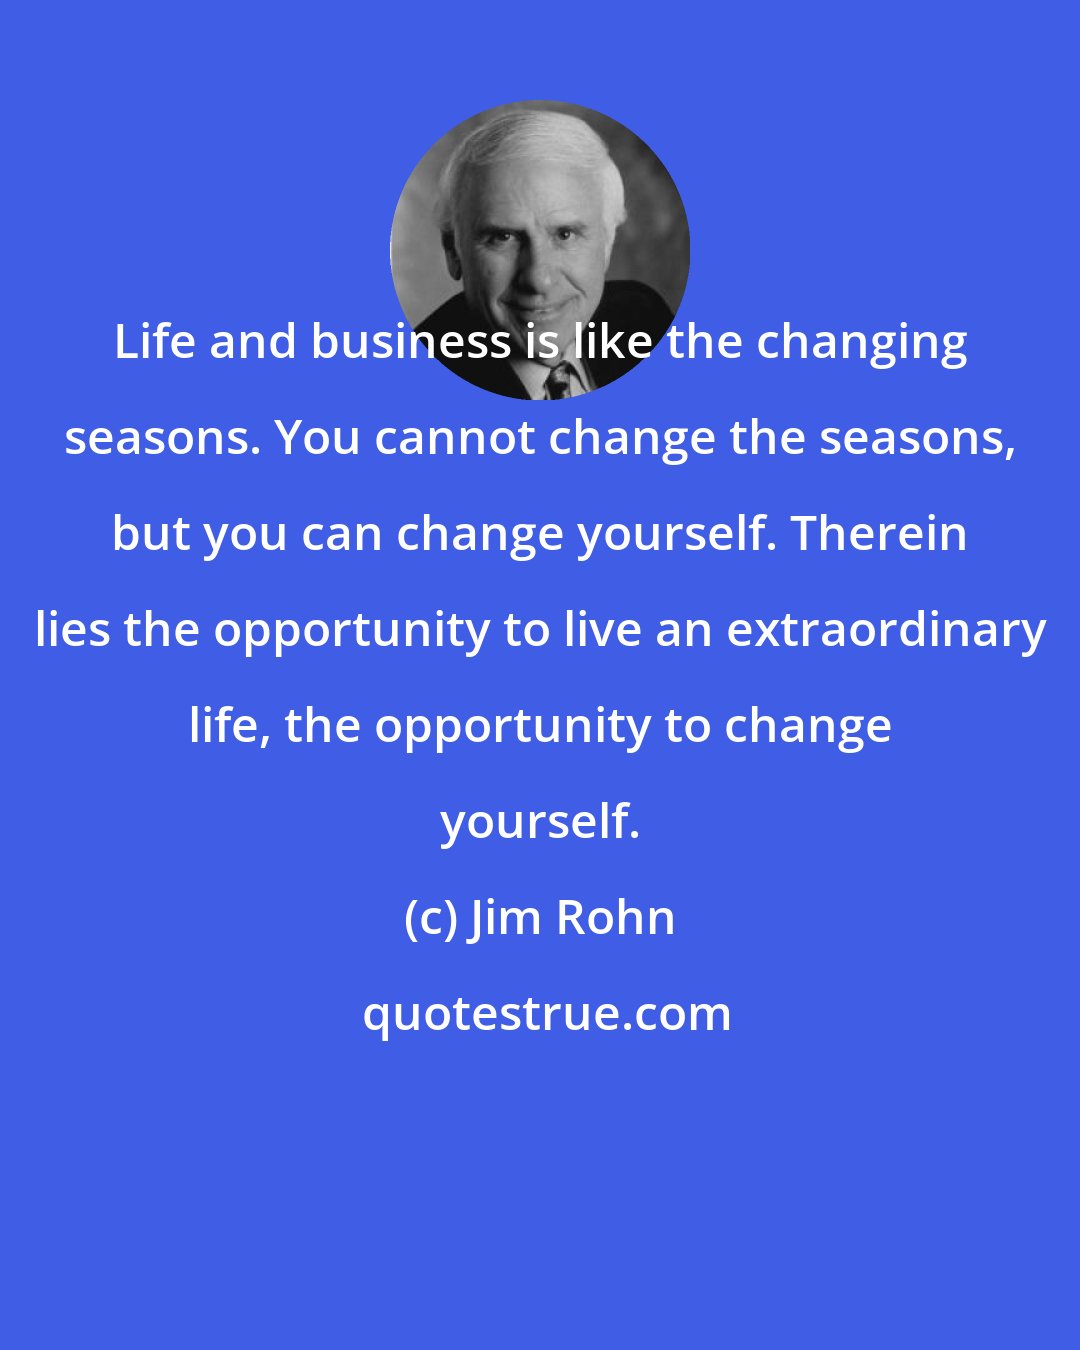 Jim Rohn: Life and business is like the changing seasons. You cannot change the seasons, but you can change yourself. Therein lies the opportunity to live an extraordinary life, the opportunity to change yourself.